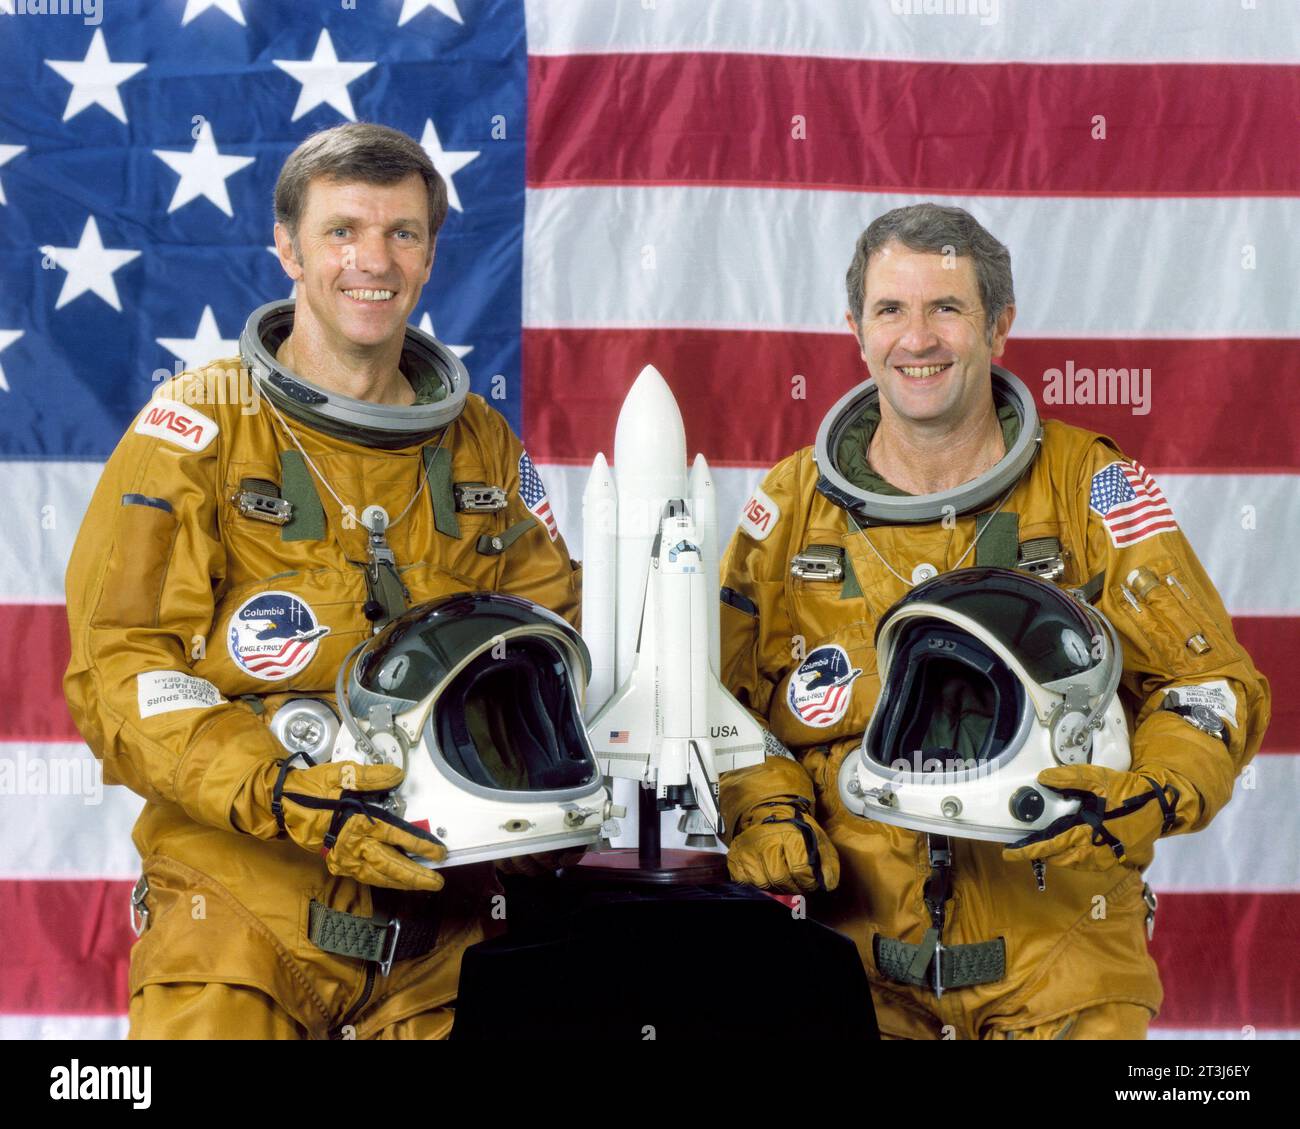 STS-2 Prime Crew which consisted of Commander Joe Engle and Pilot Richard Truly standing in front of an American flag holding their helmets with a Shuttle model on the table in front of them. Stock Photo